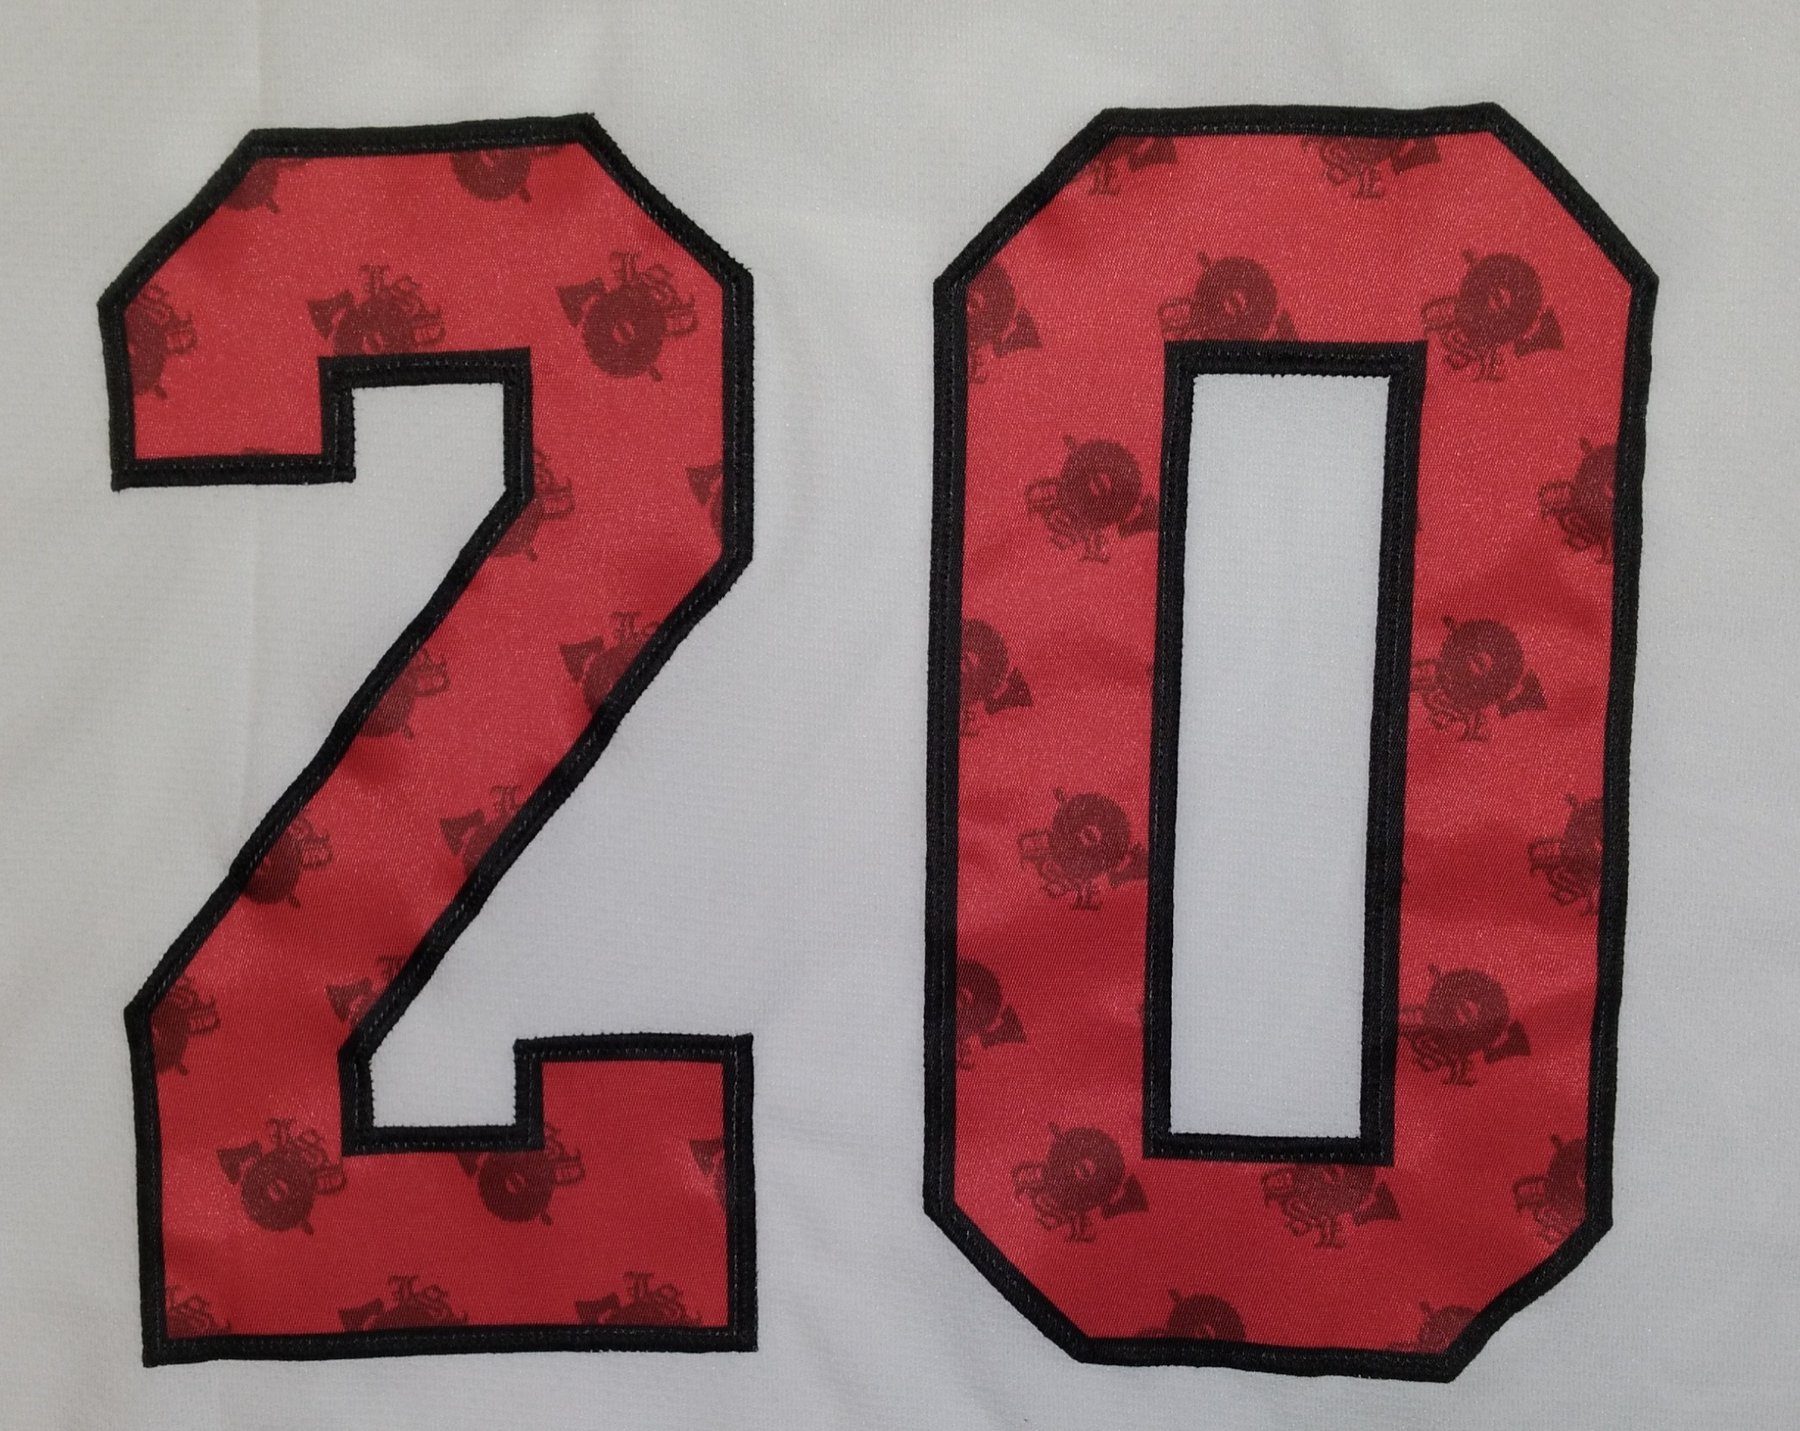 20 jersey number